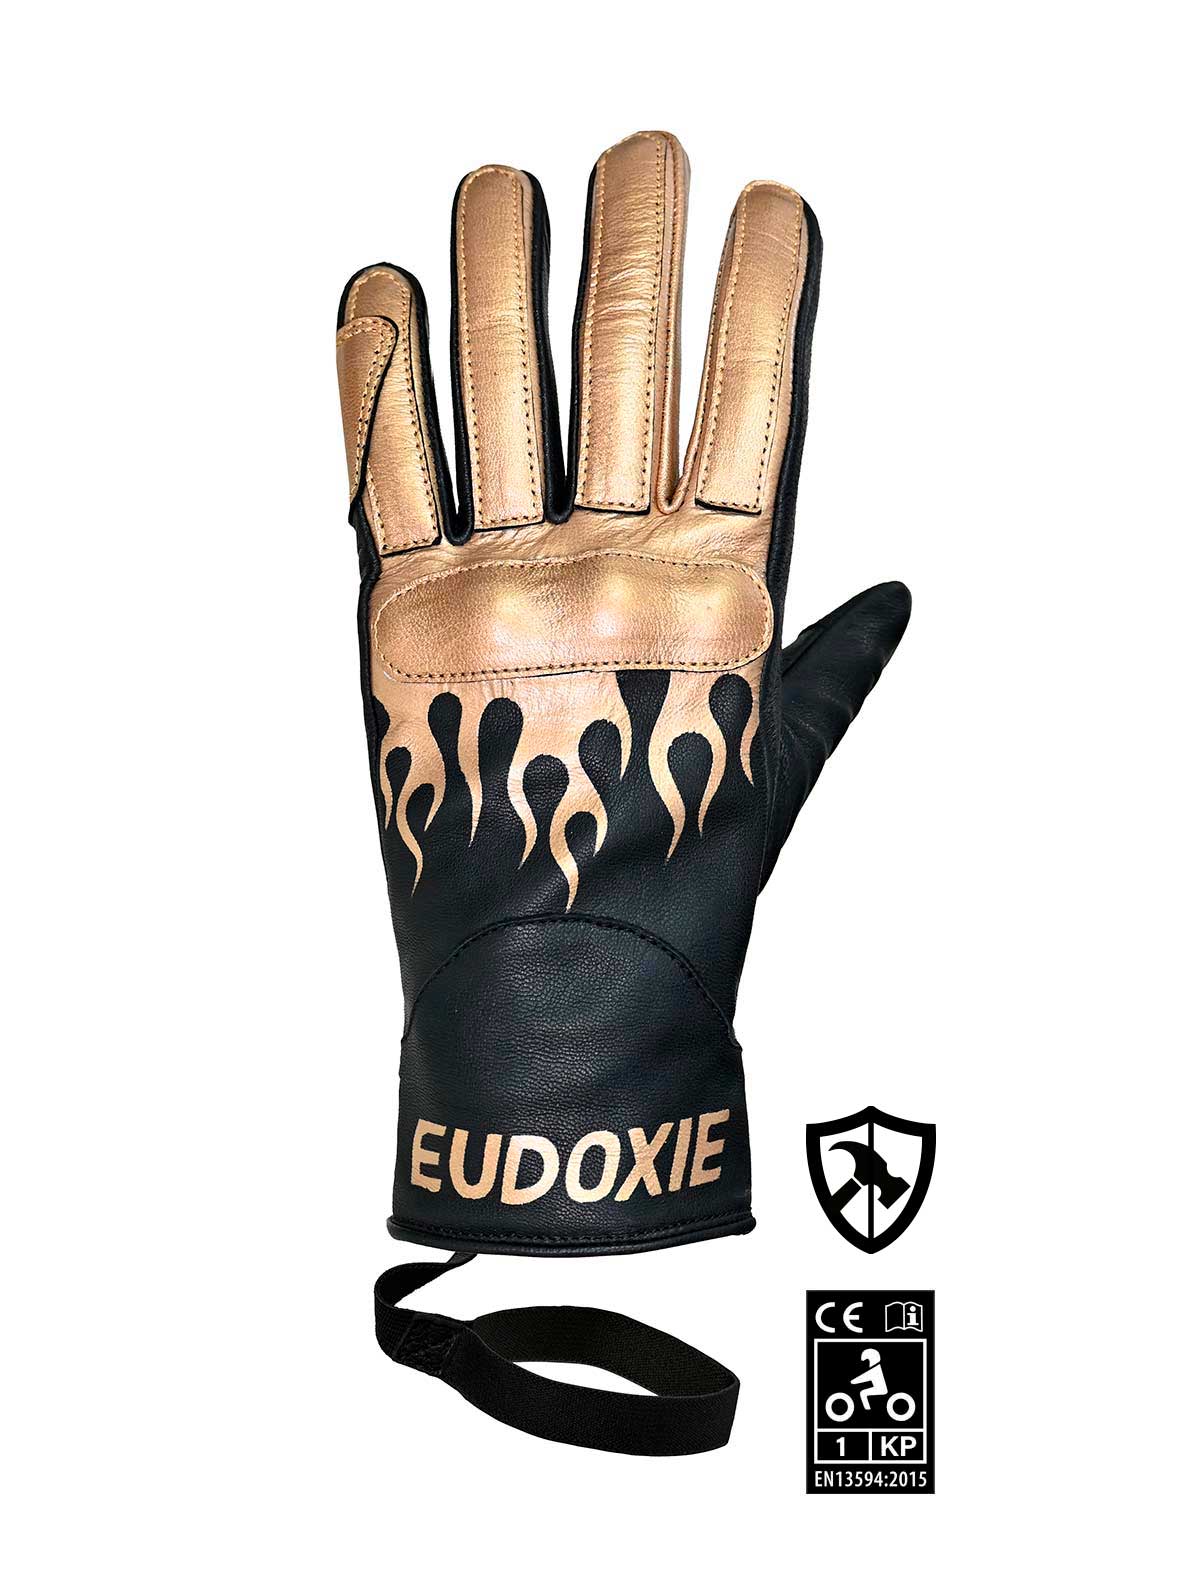 Black Women motorcycle gloves with golden flames from Eudoxie